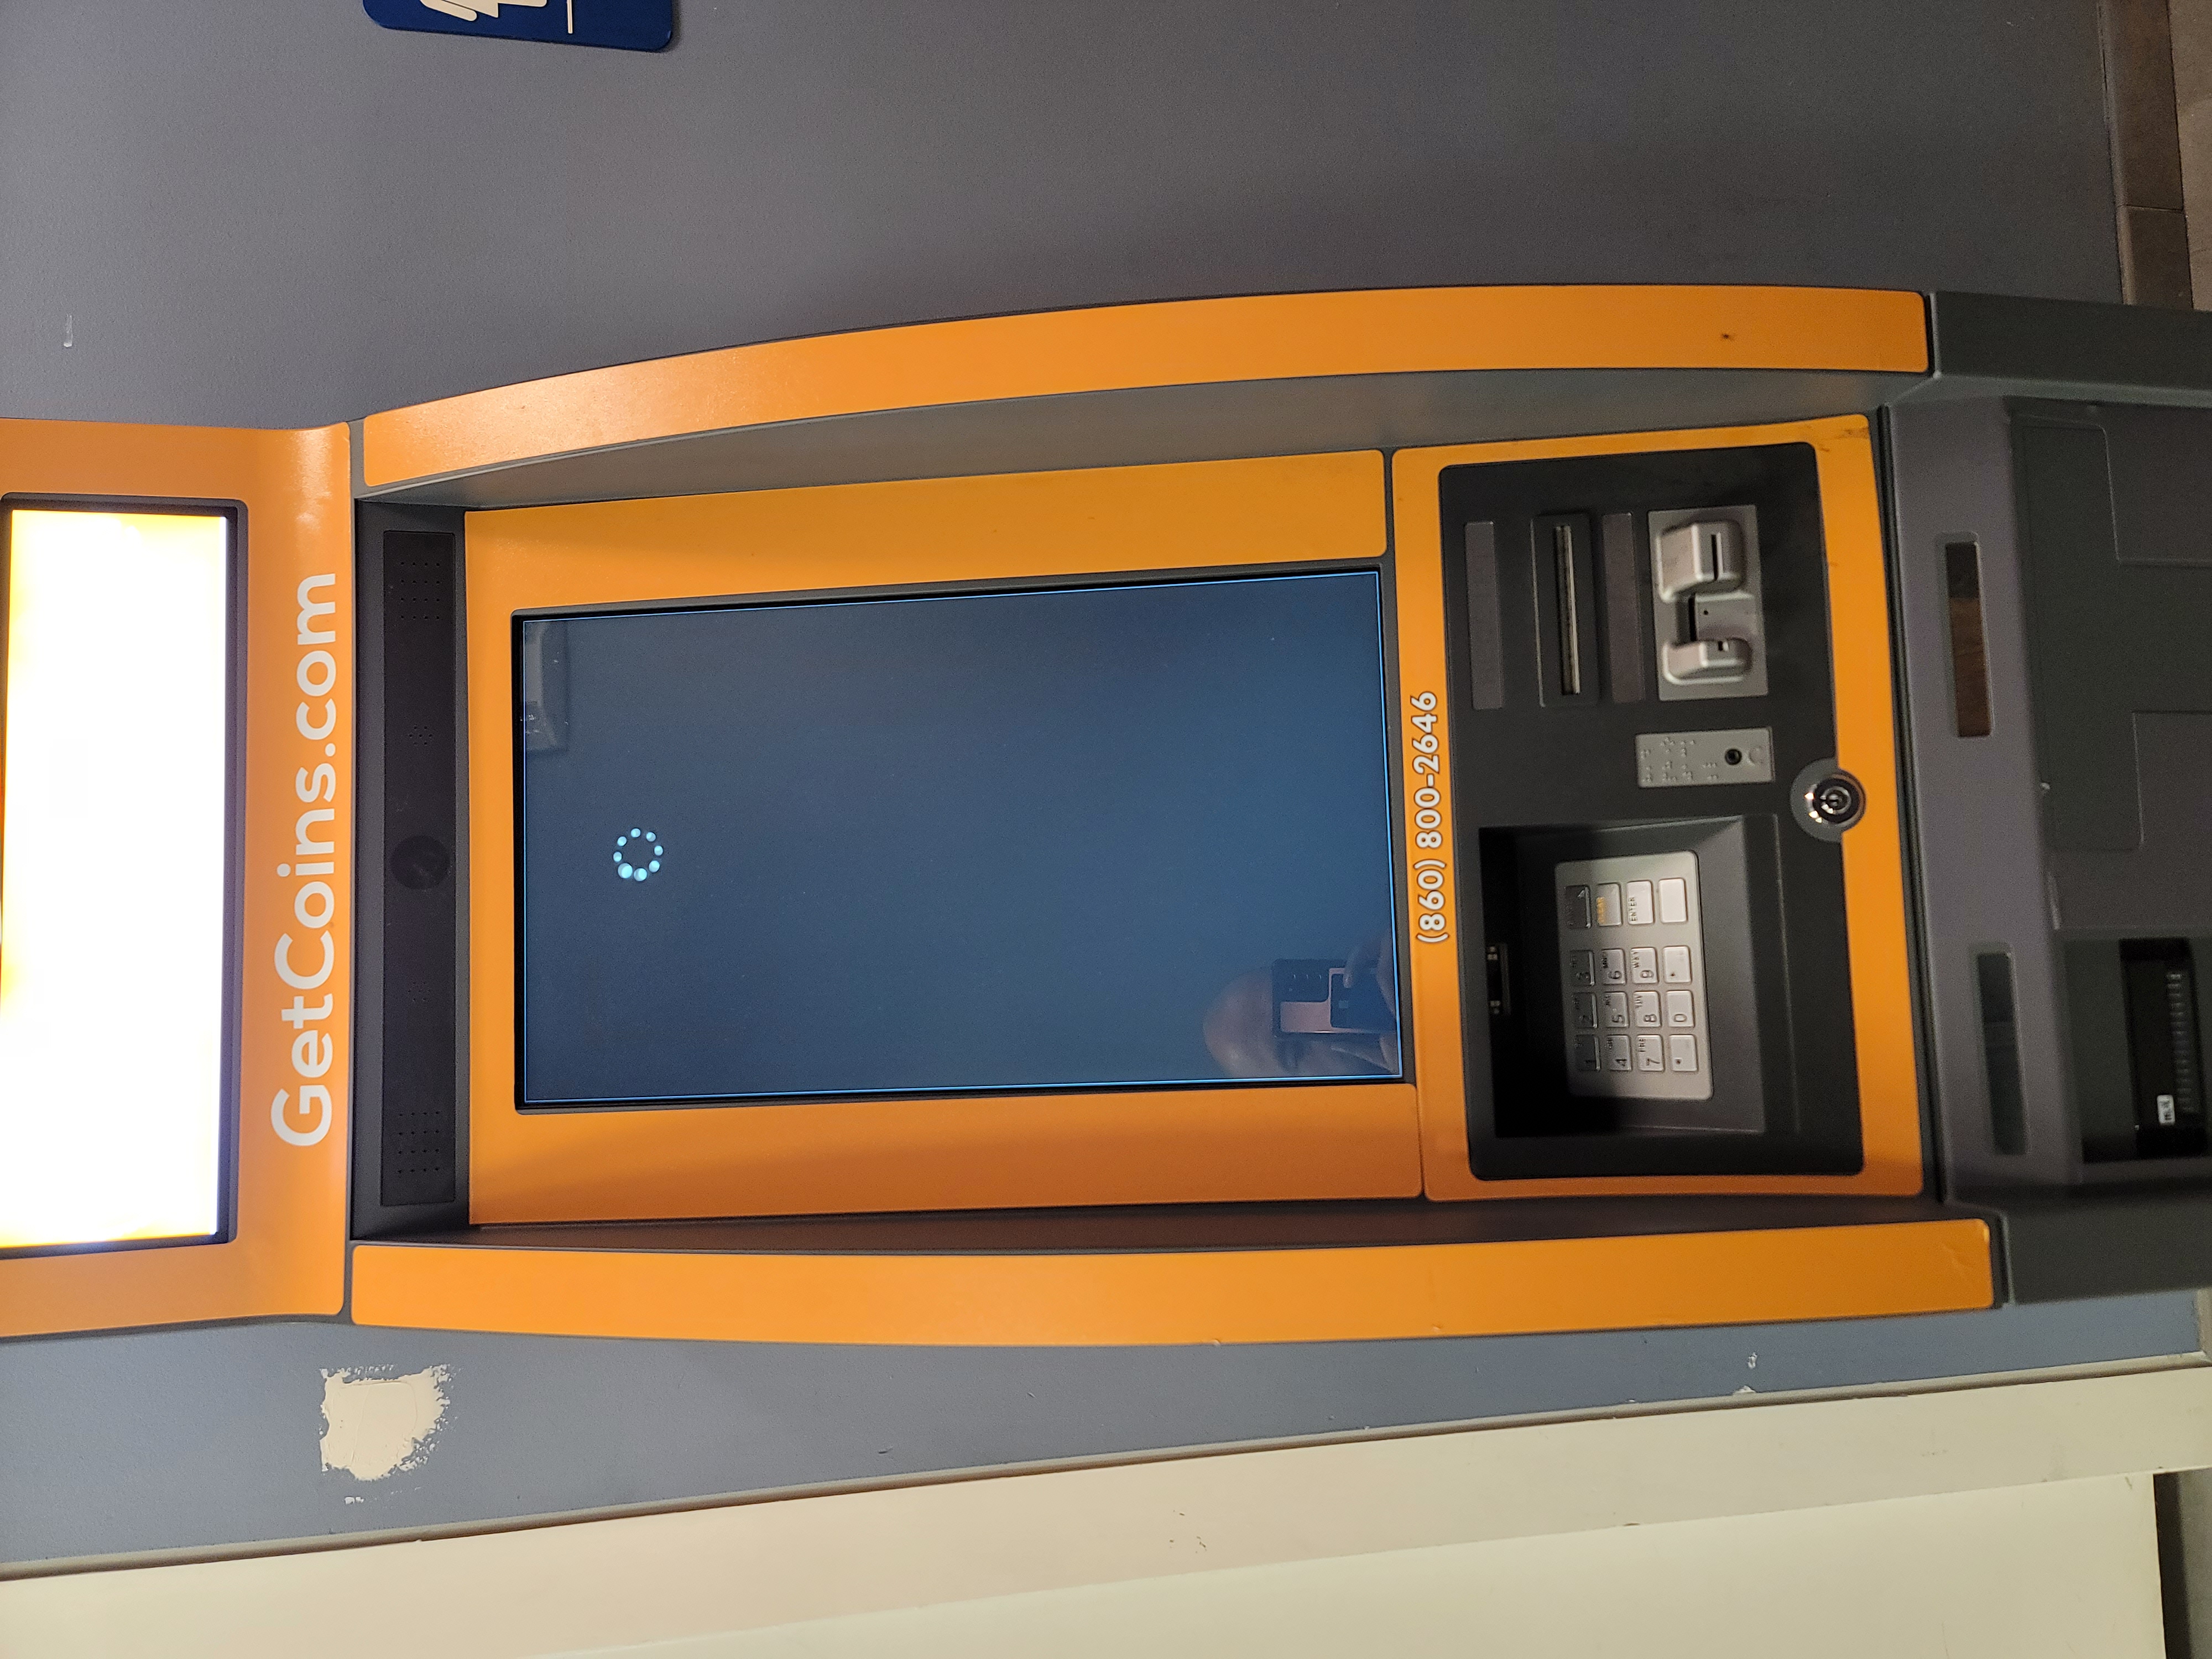 Getcoins - Bitcoin ATM - Inside of Washateria Lounge in Houston, Texas